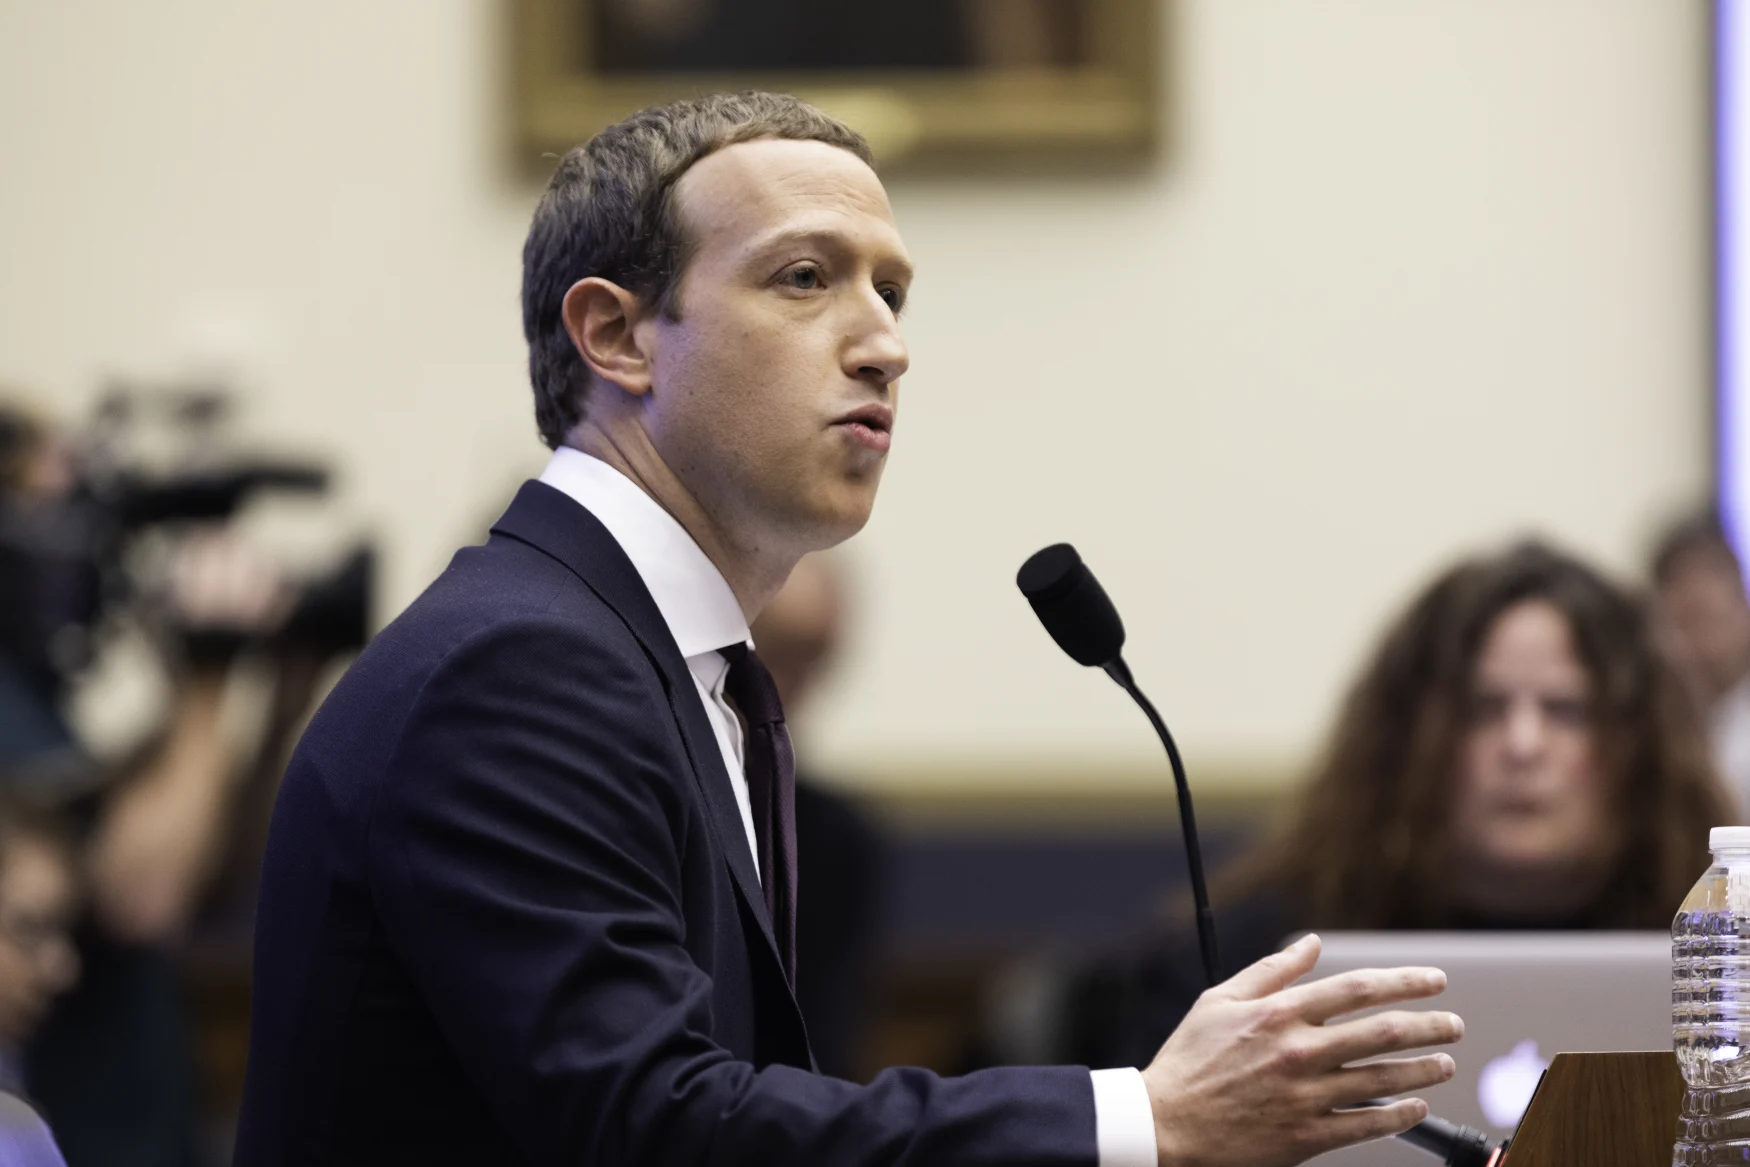 The Facebook CEO, Mark Zuckerberg, testified before the House Financial Services Committee on Wednesday October 23, 2019 Washington, D.C. (Photo by Aurora Samperio/NurPhoto via Getty Images)